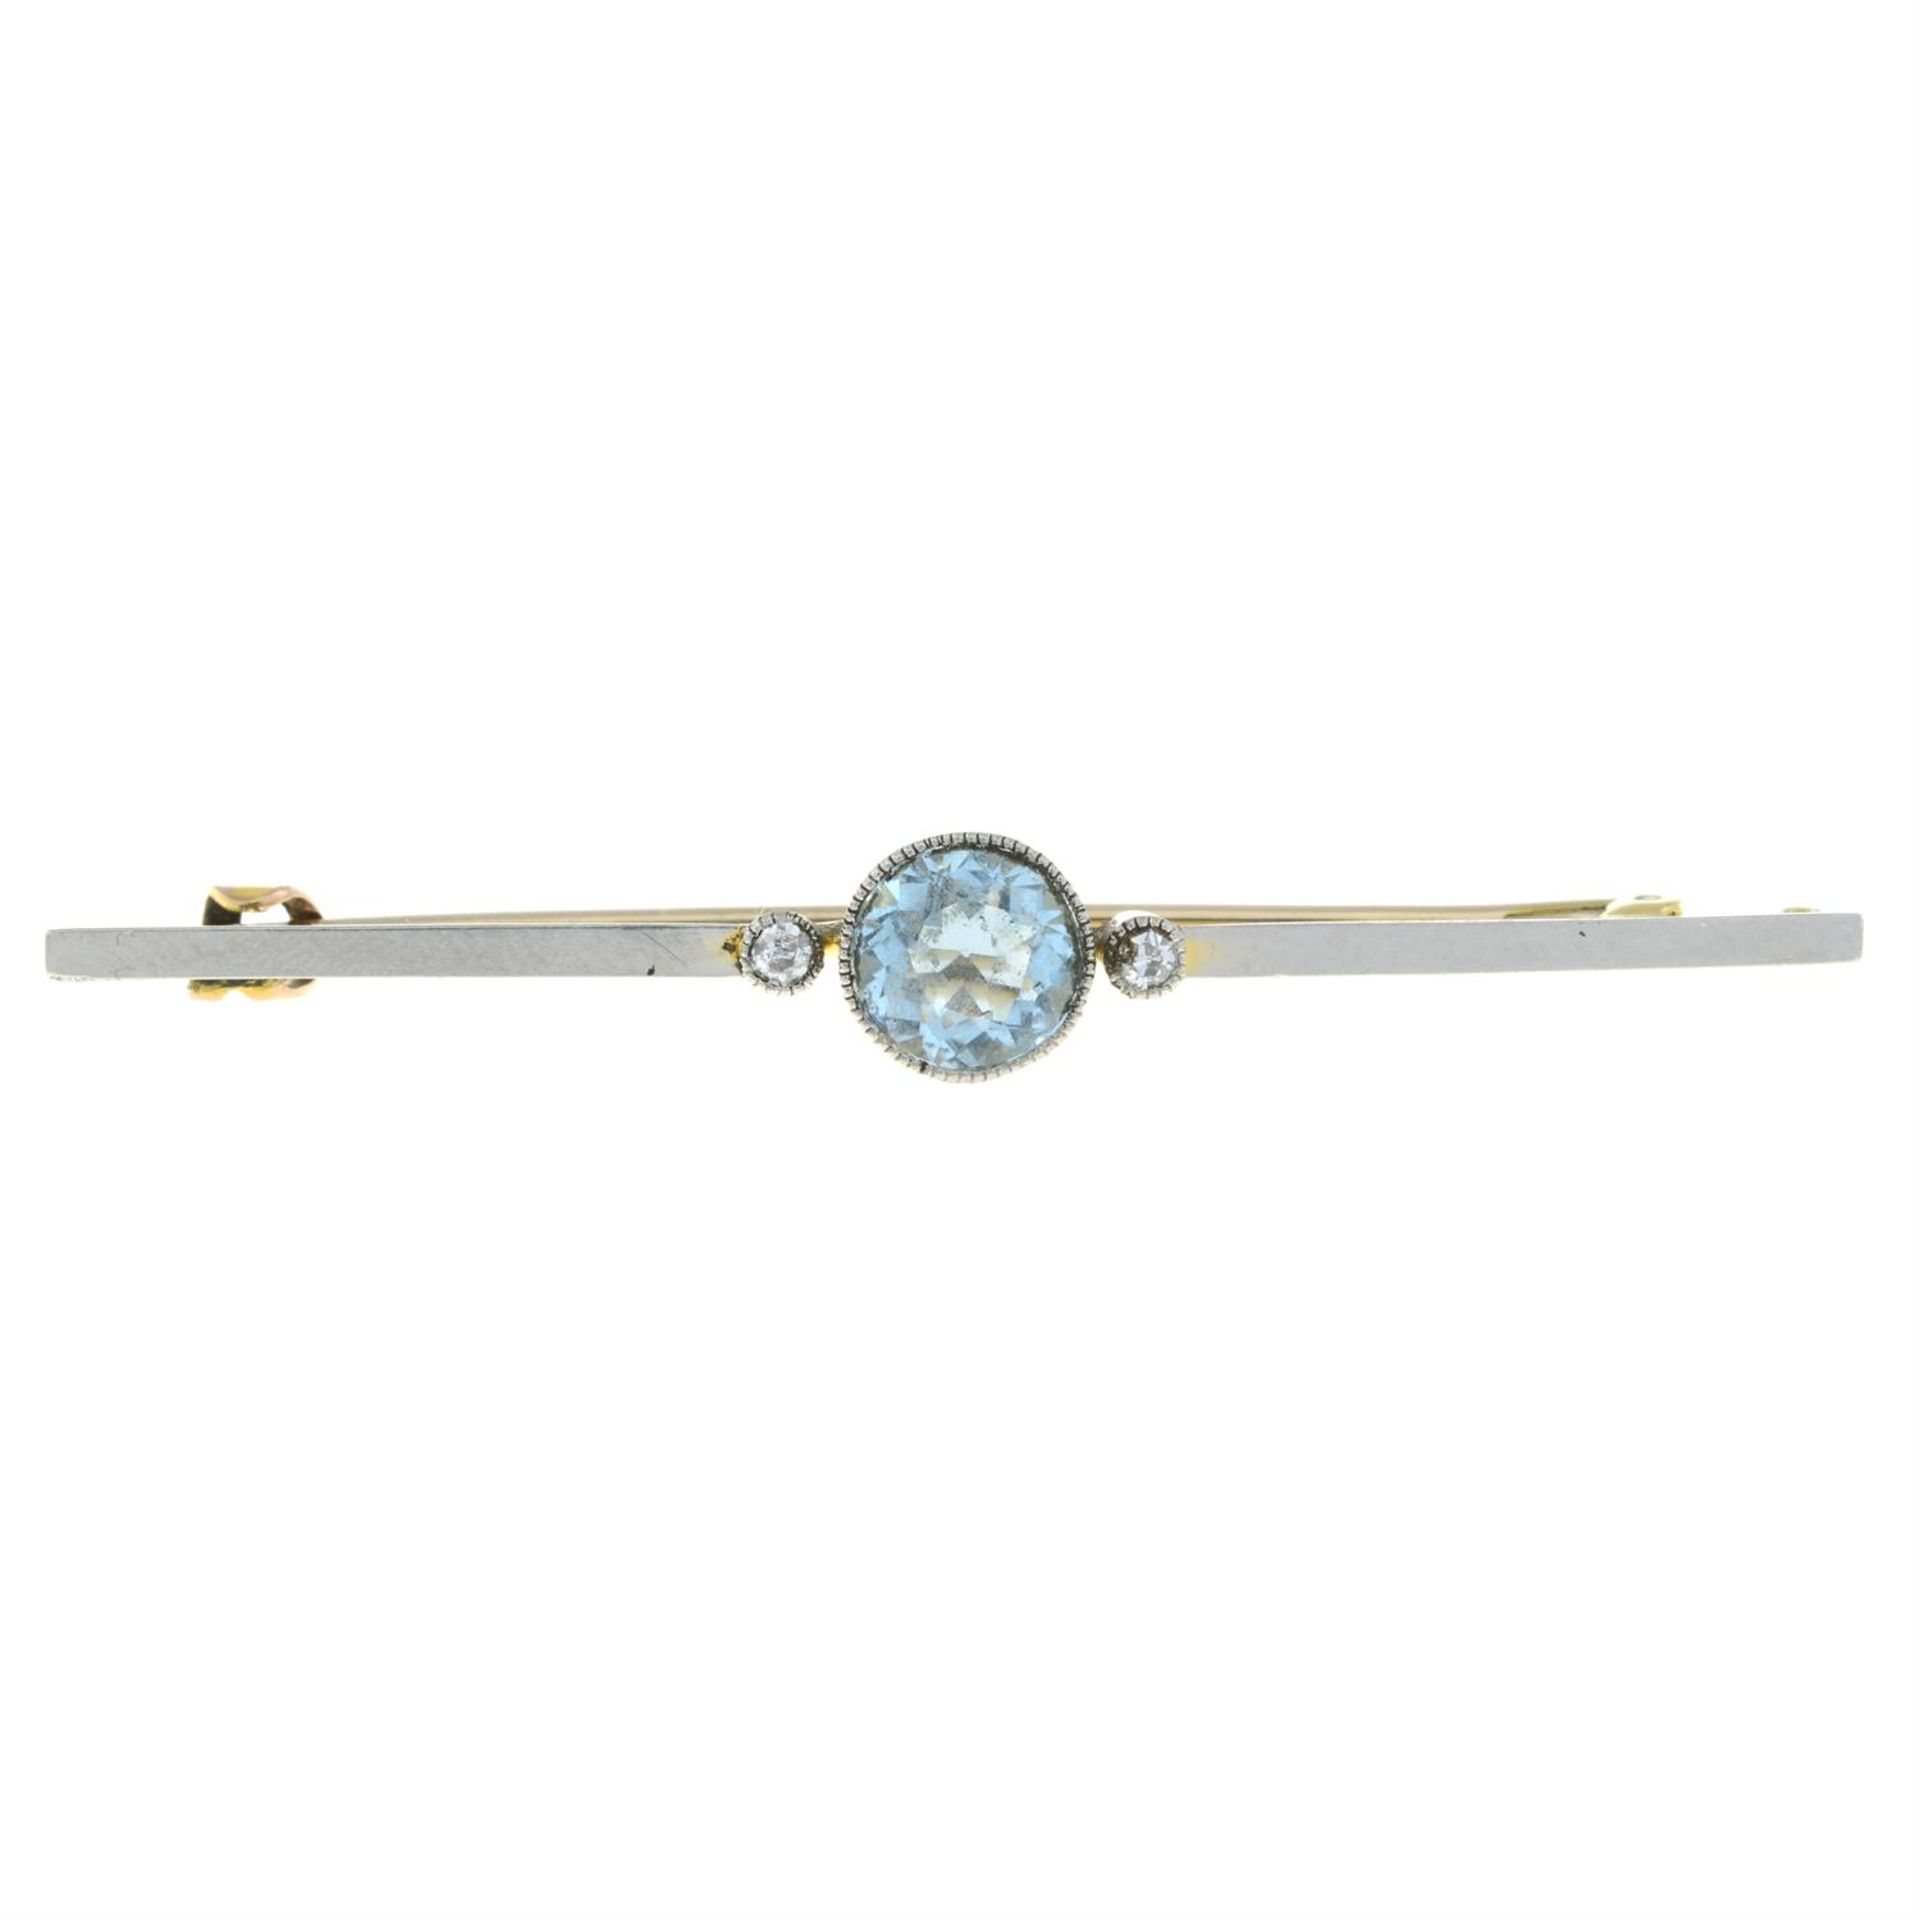 An early 20th century gold and platinum aquamarine and diamond bar brooch.